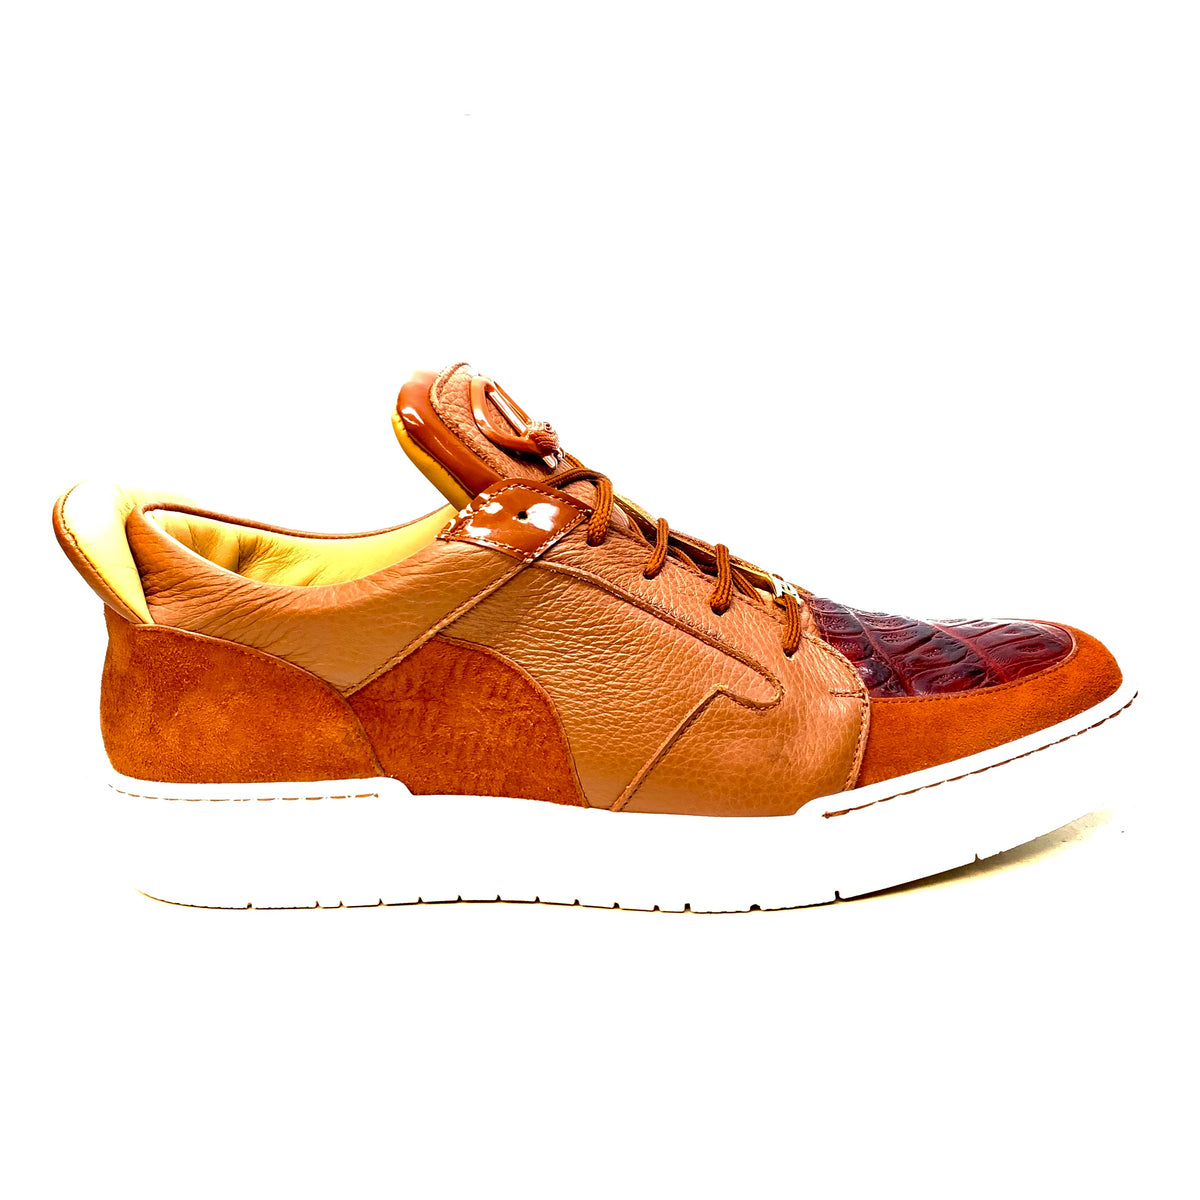 Mauri '8412' Two Tone Brown Alligator/Suede/Patent Leather Low Top Sneaker - Dudes Boutique